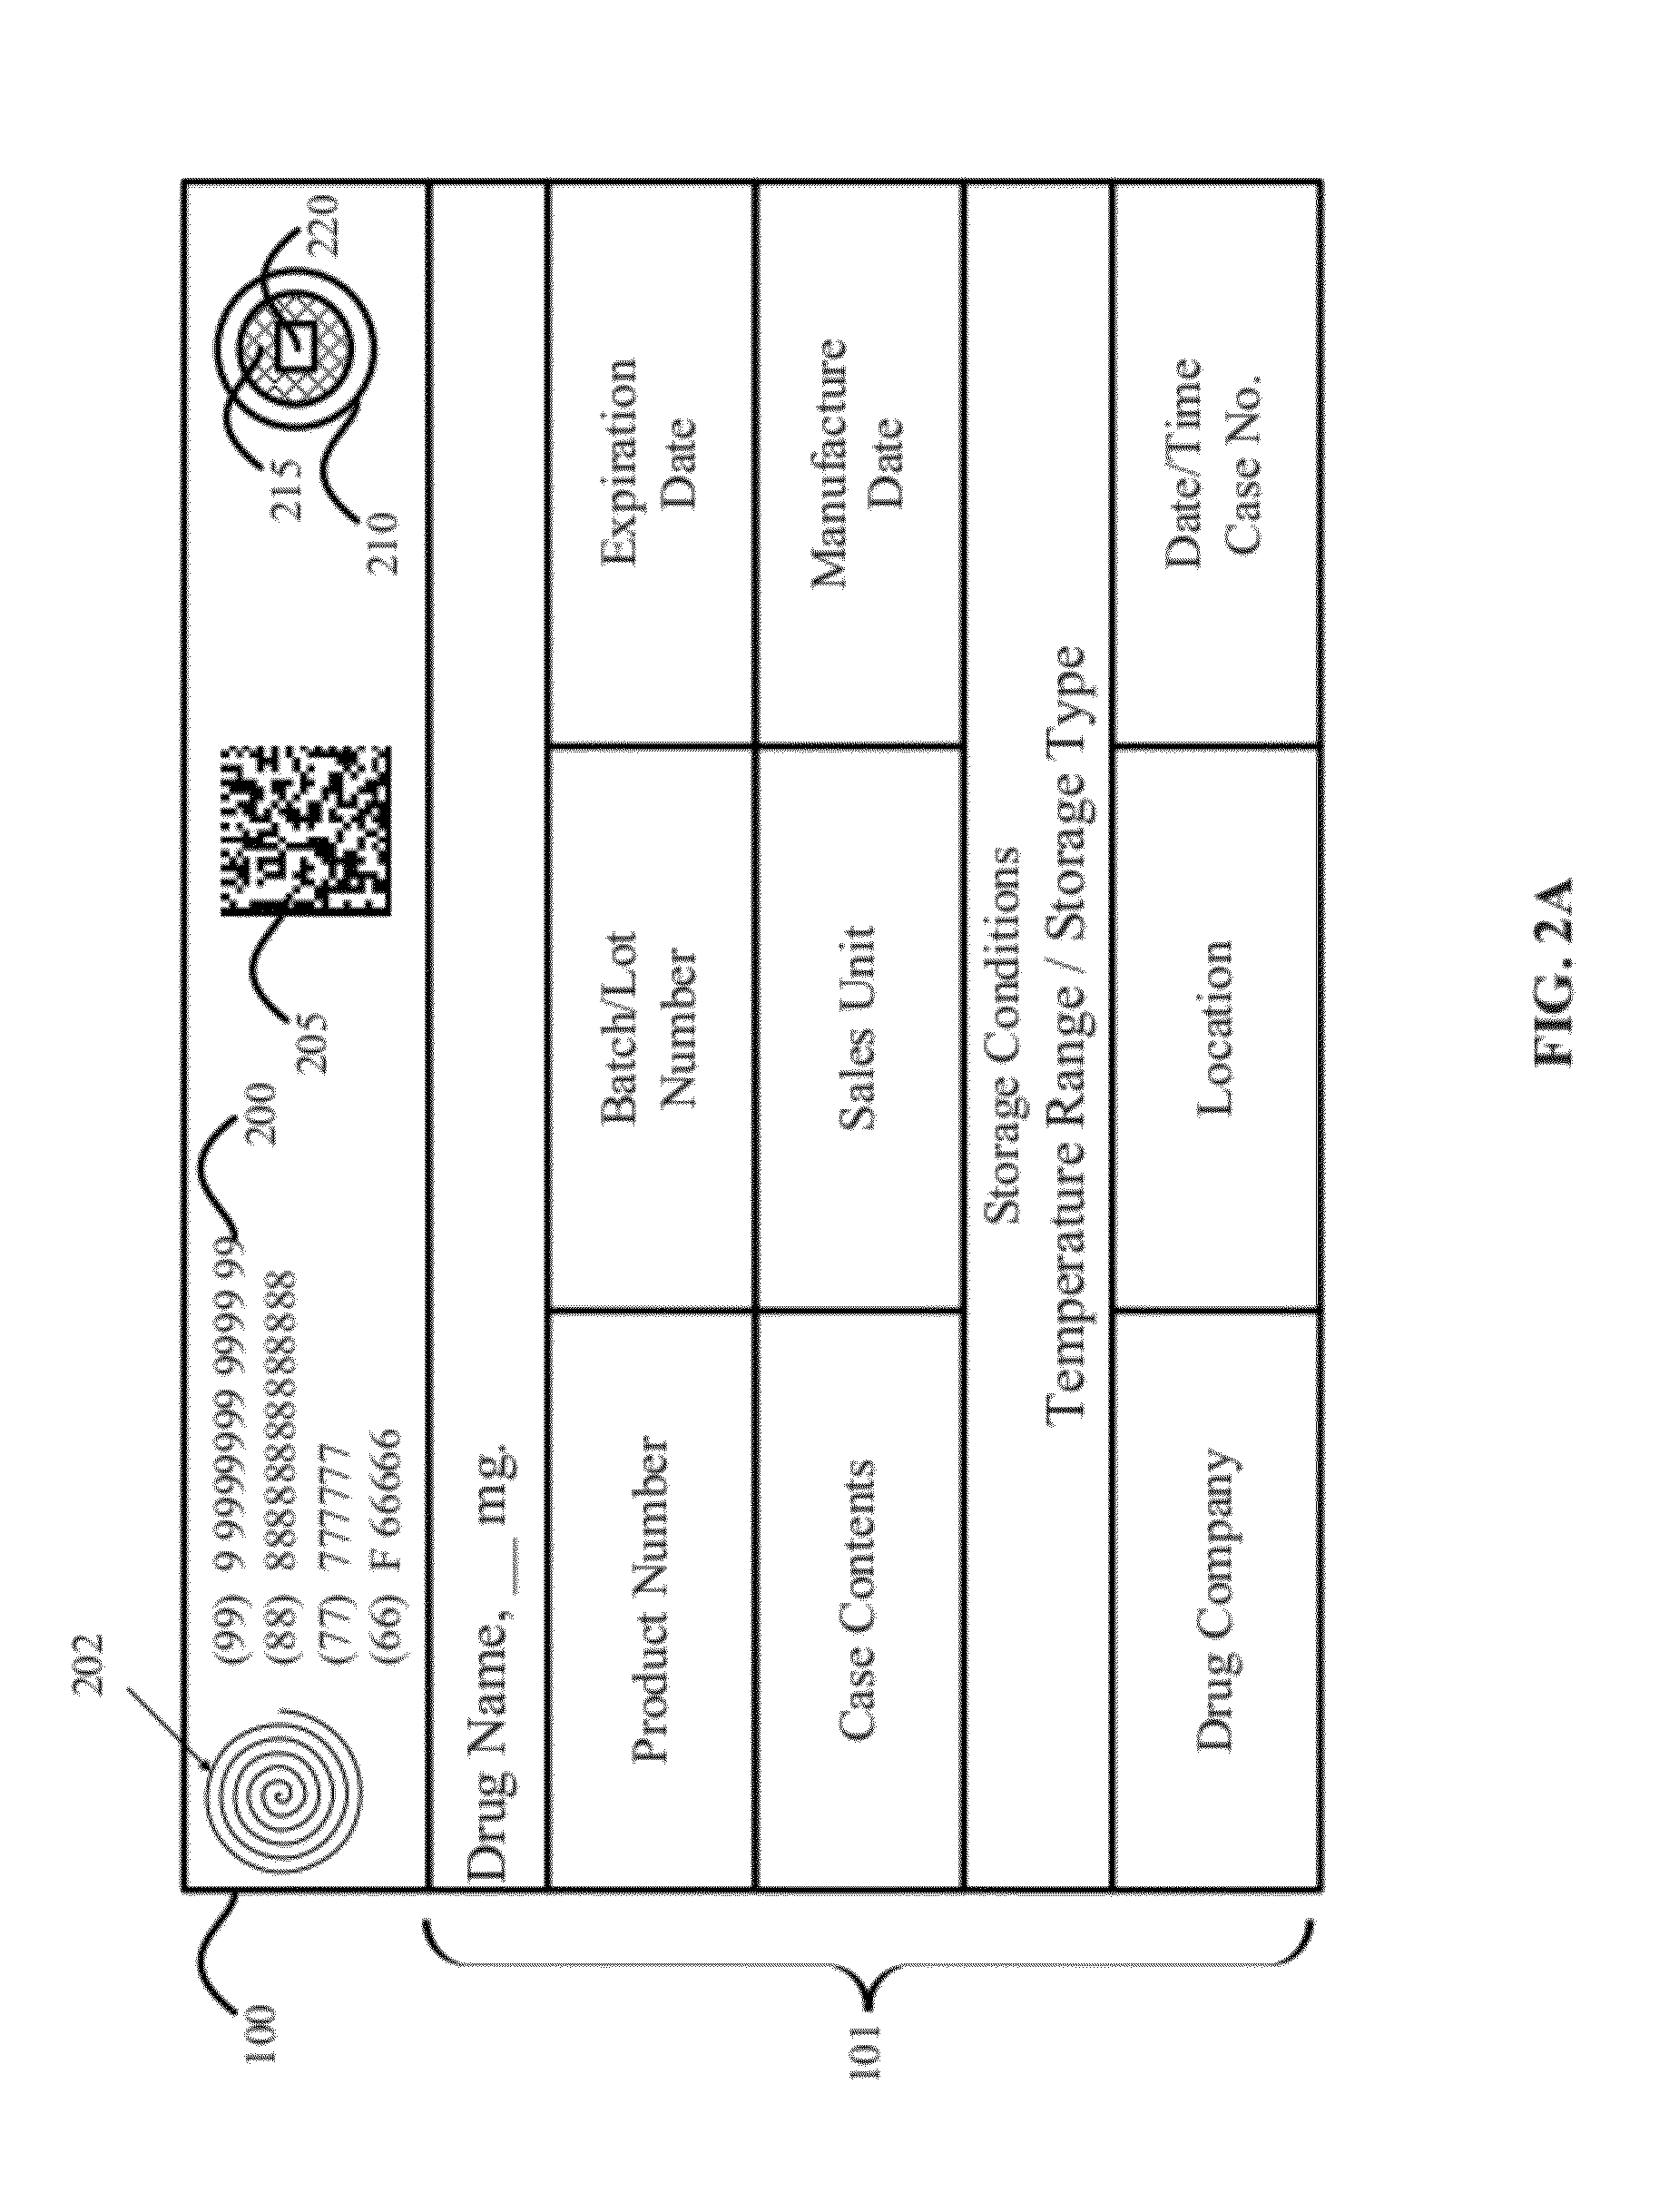 Computing systems and methods for electronically indicating the acceptability of a product